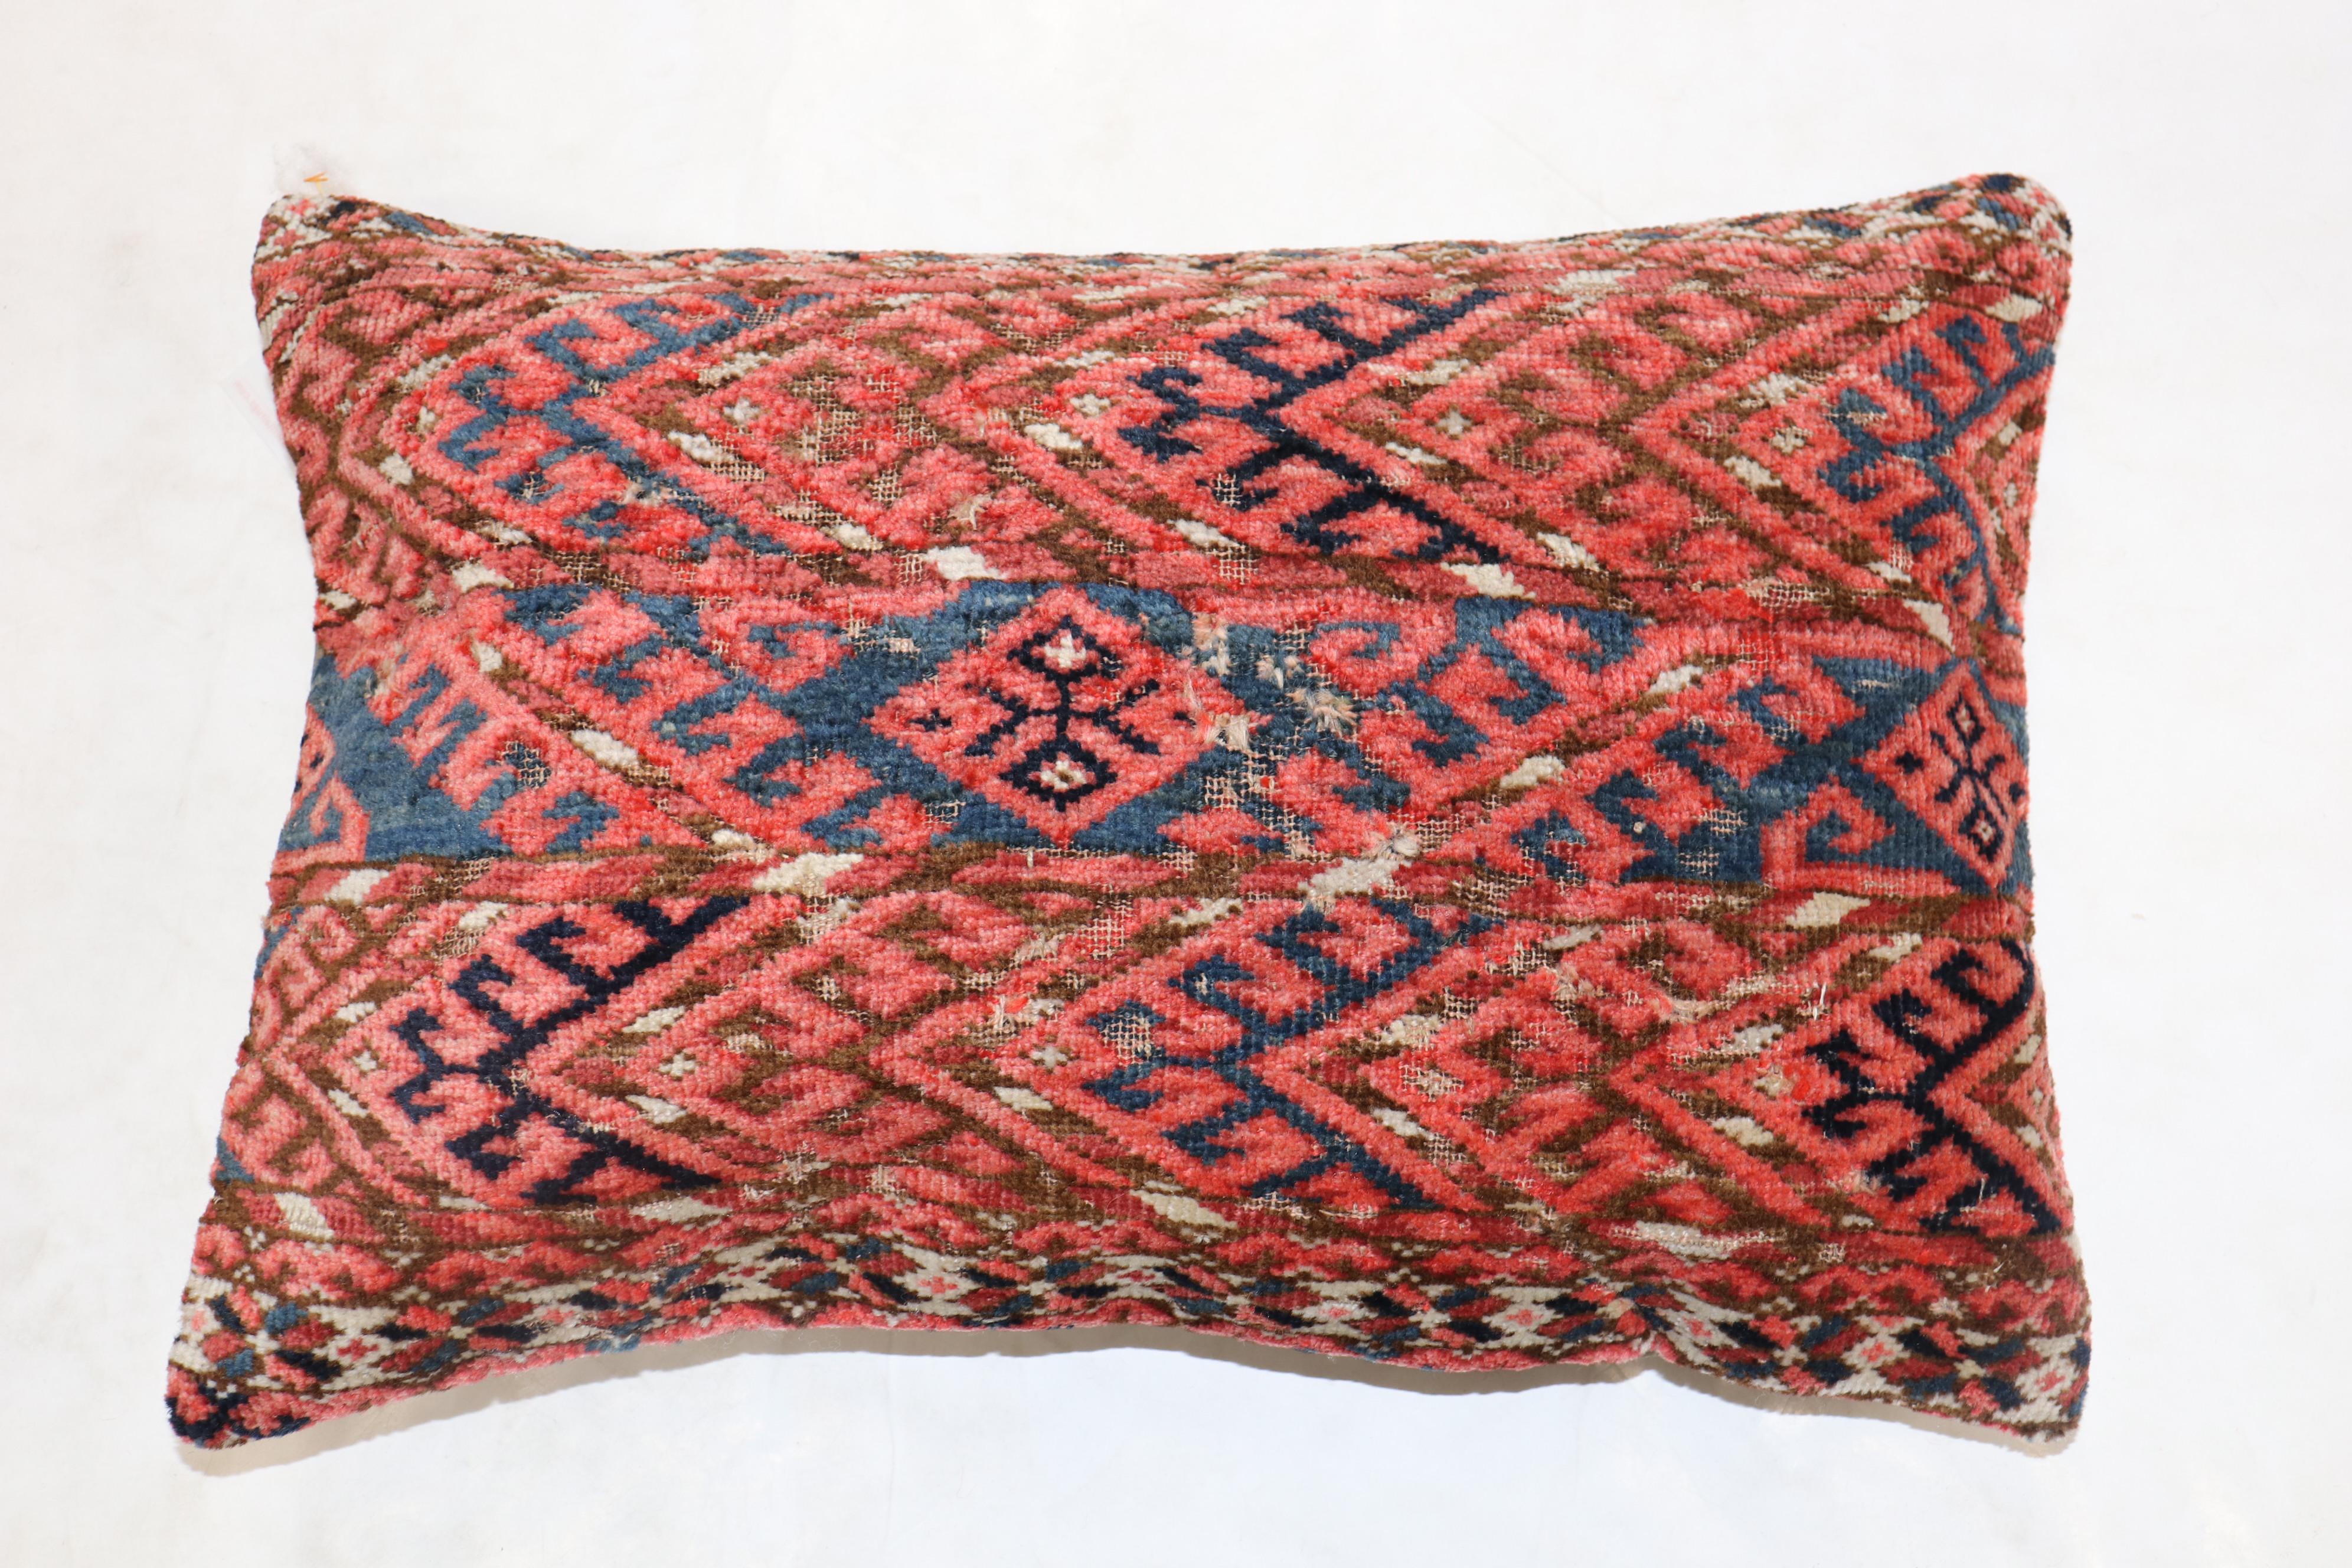 Pillow made from a 19th-century Tekke rug in a lumbar size.

Measures: 16